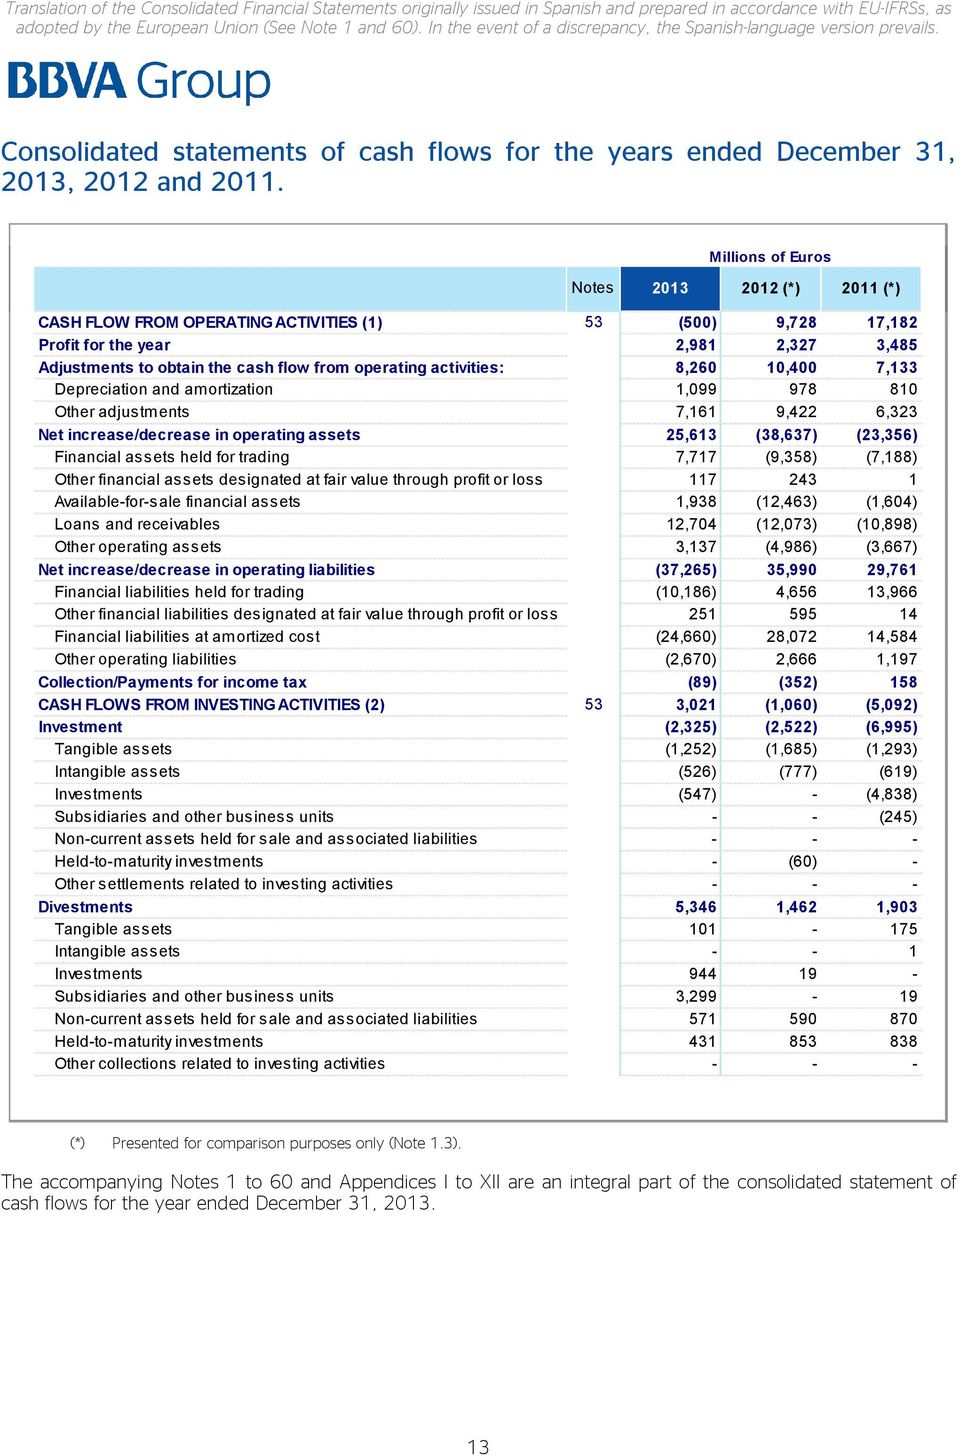 Notes 2013 2012 (*) 2011 (*) CASH FLOW FROM OPERATING ACTIVITIES (1) 53 (500) 9,728 17,182 Profit for the year 2,981 2,327 3,485 Adjustments to obtain the cash flow from operating activities: 8,260